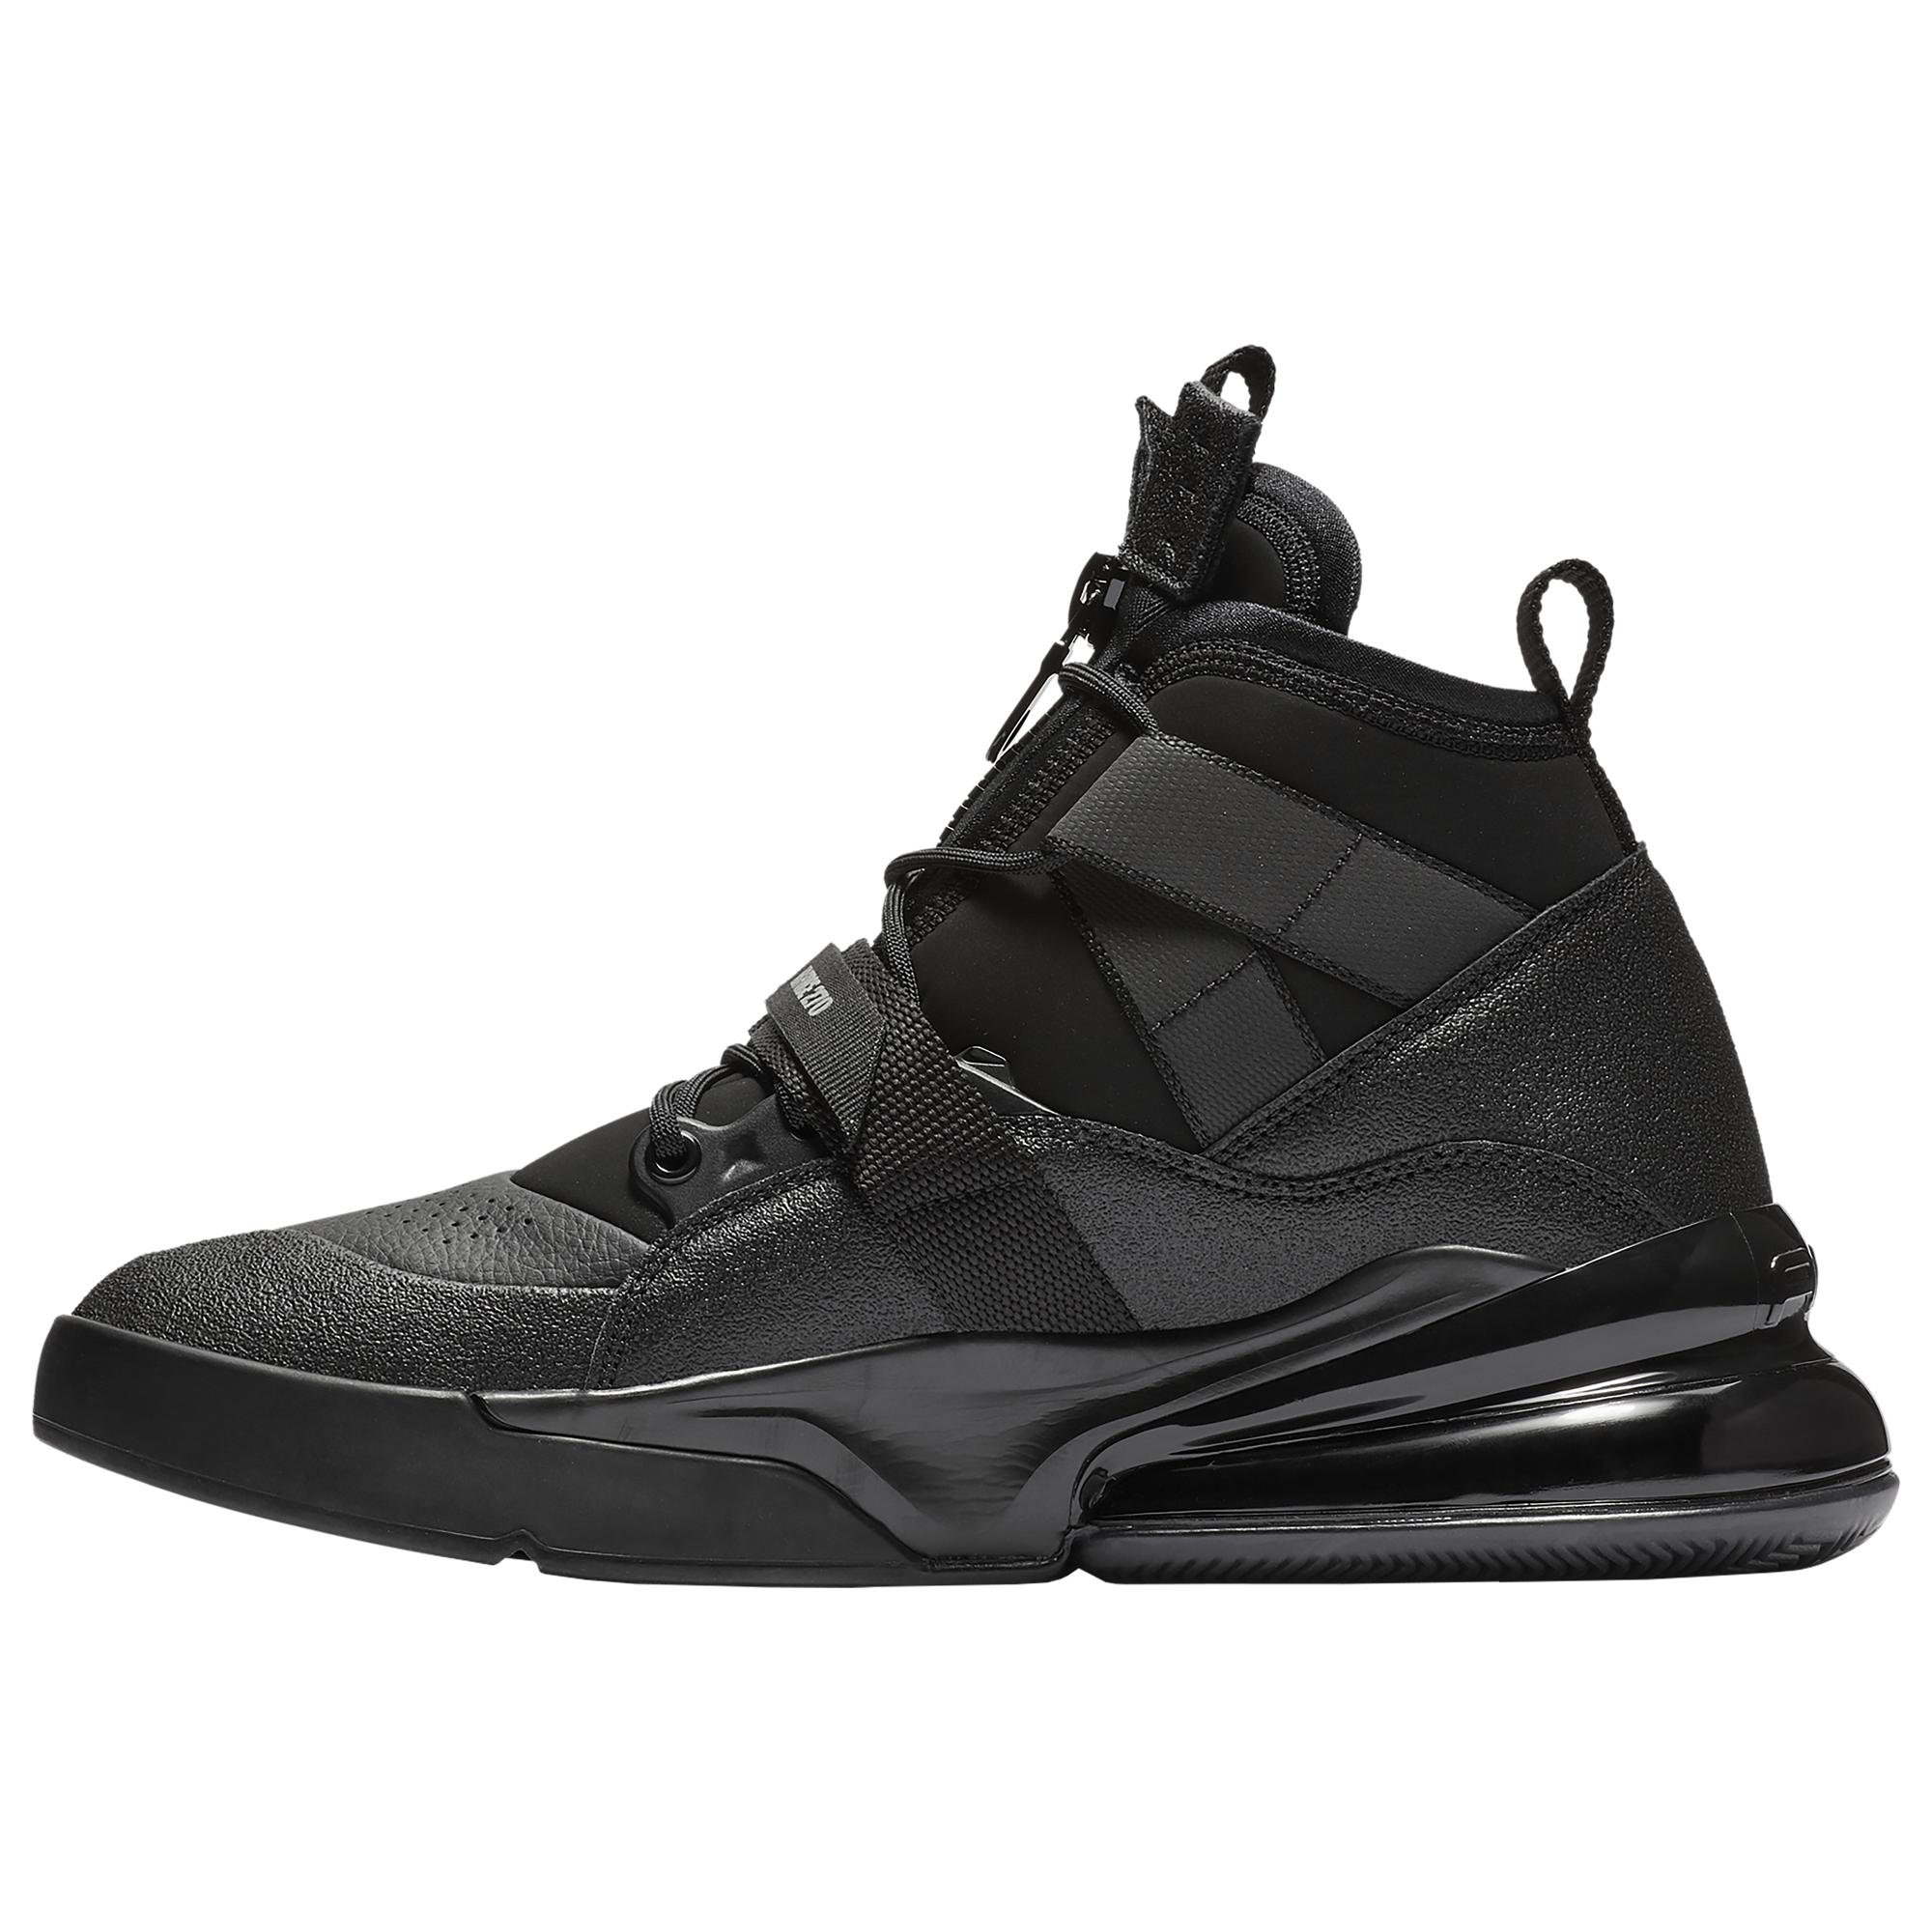 Nike Rubber Air Force 270 Utility Basketball Shoes in Black for Men - Lyst